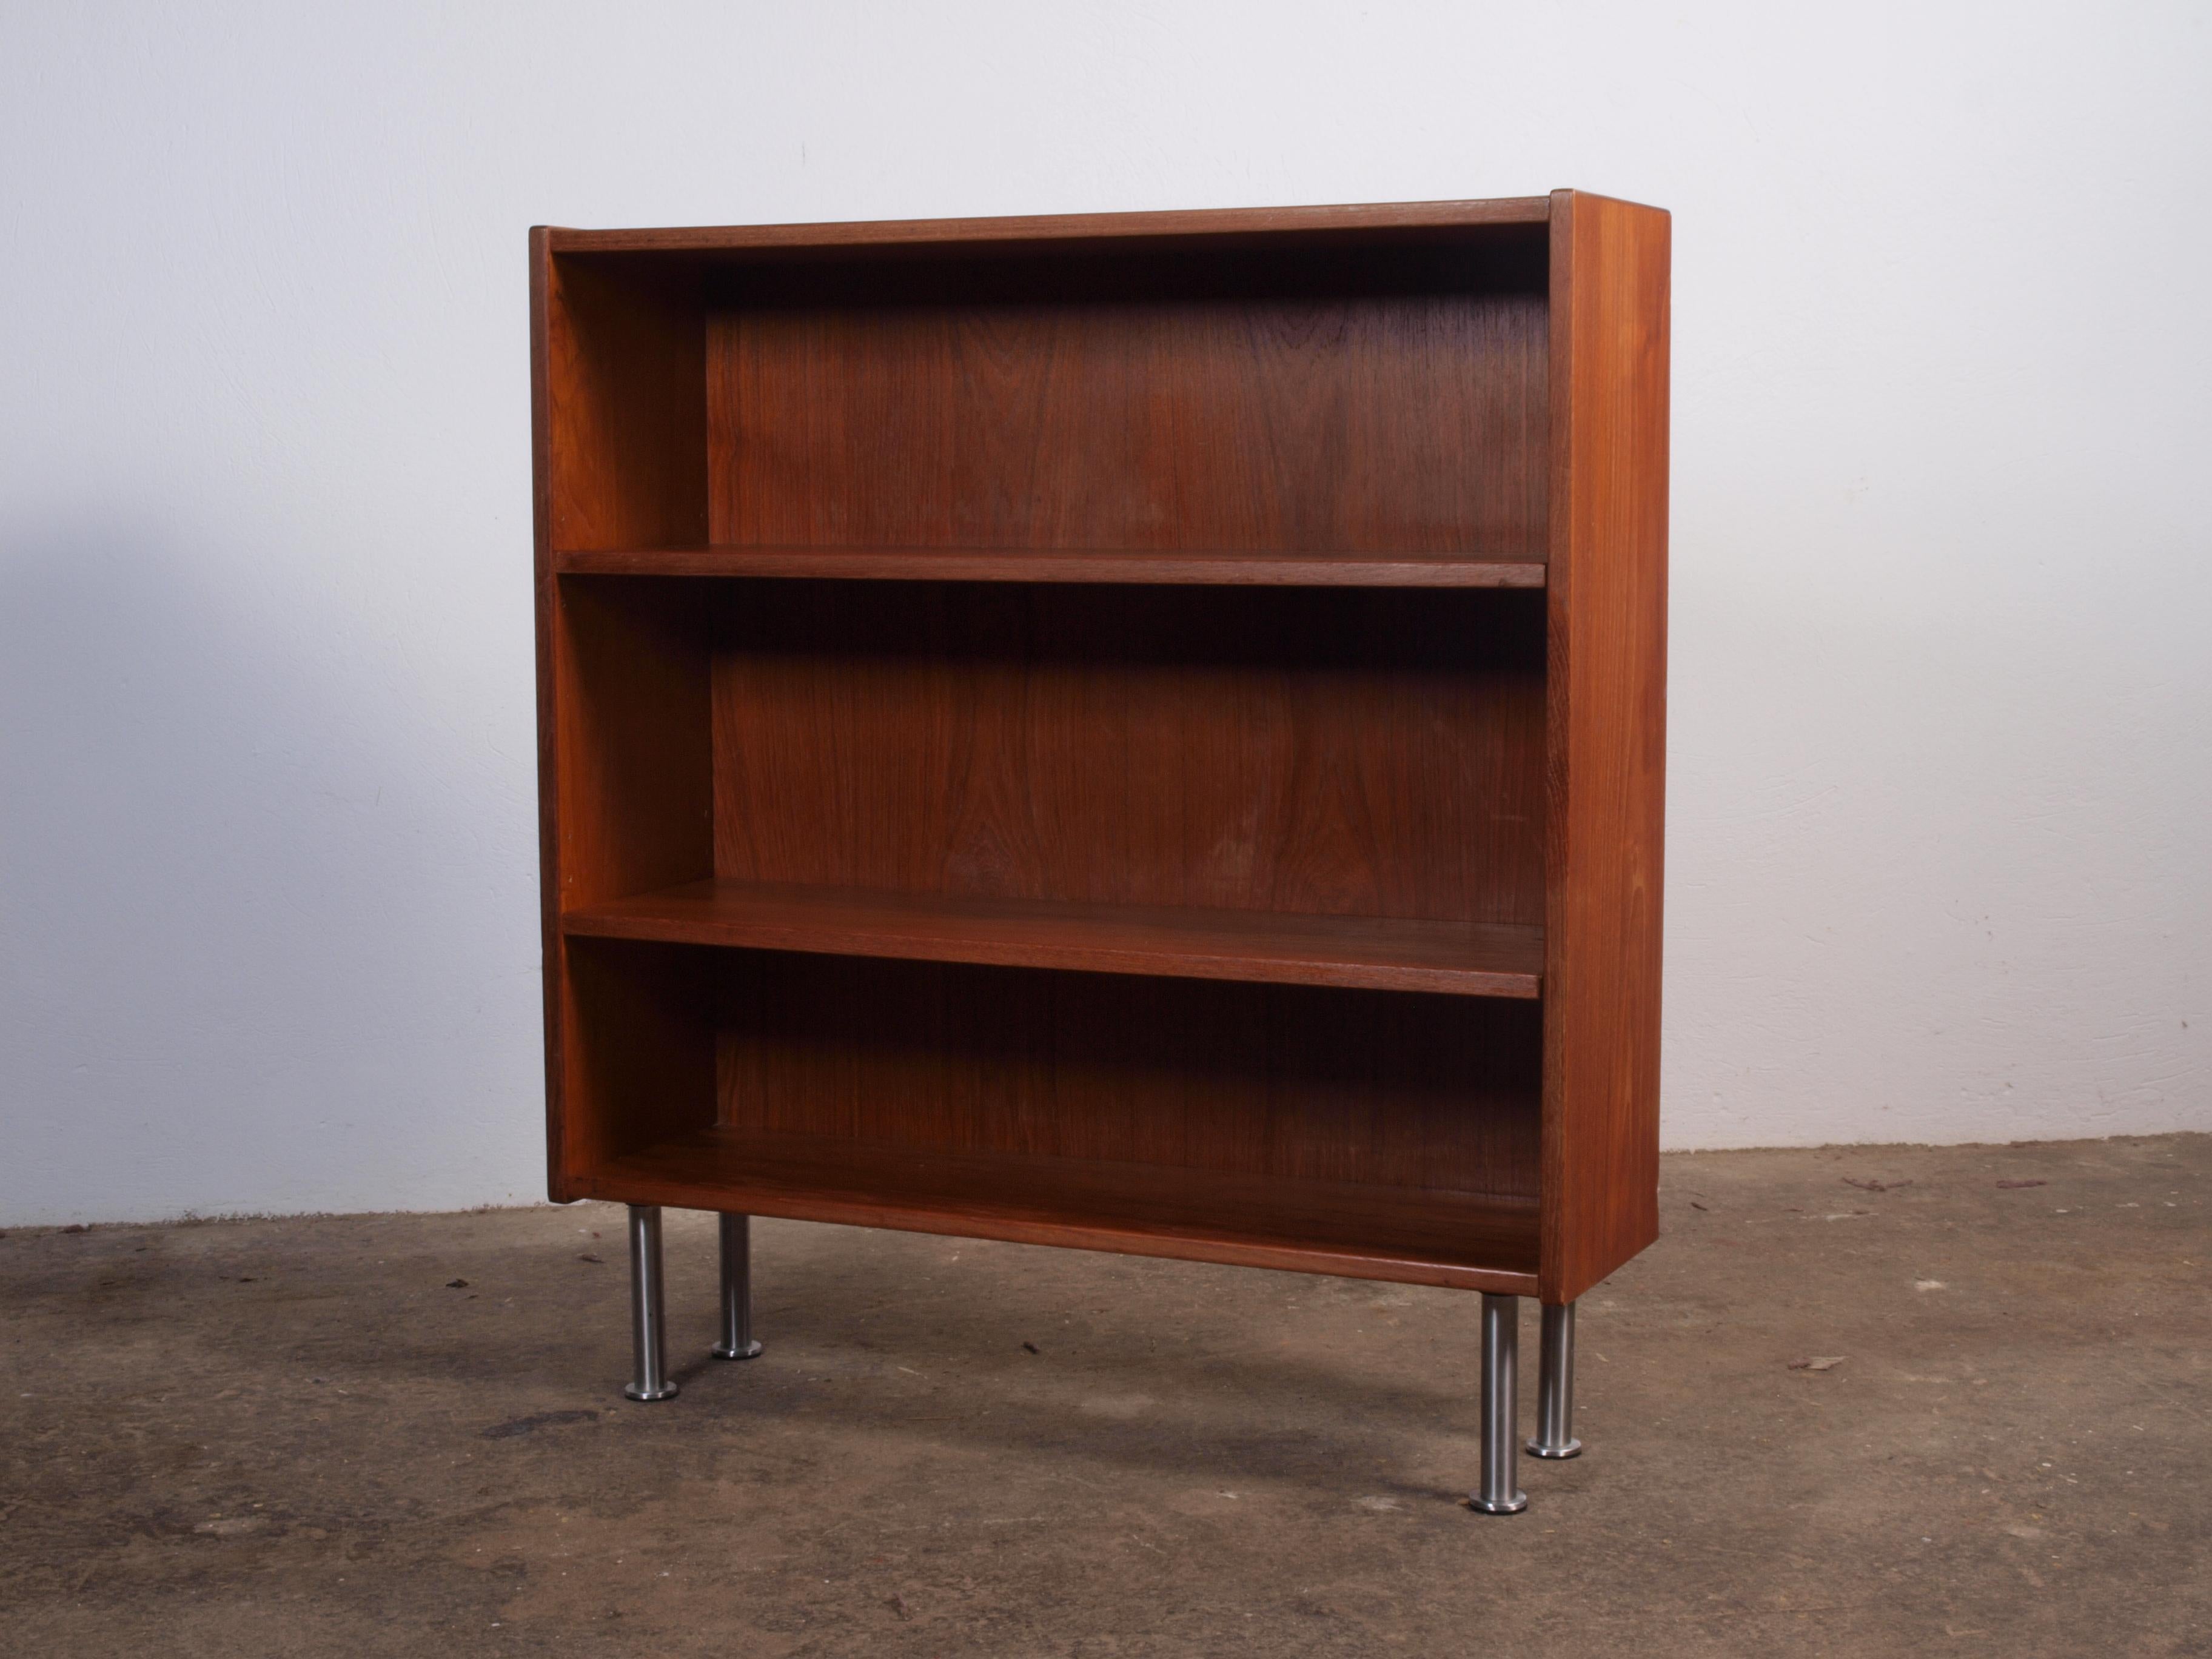 Minimalistic Danish teak book shelf cabinet in teak. In good condition with small marks, see pictures. Please reach out for a customized shipping quote.